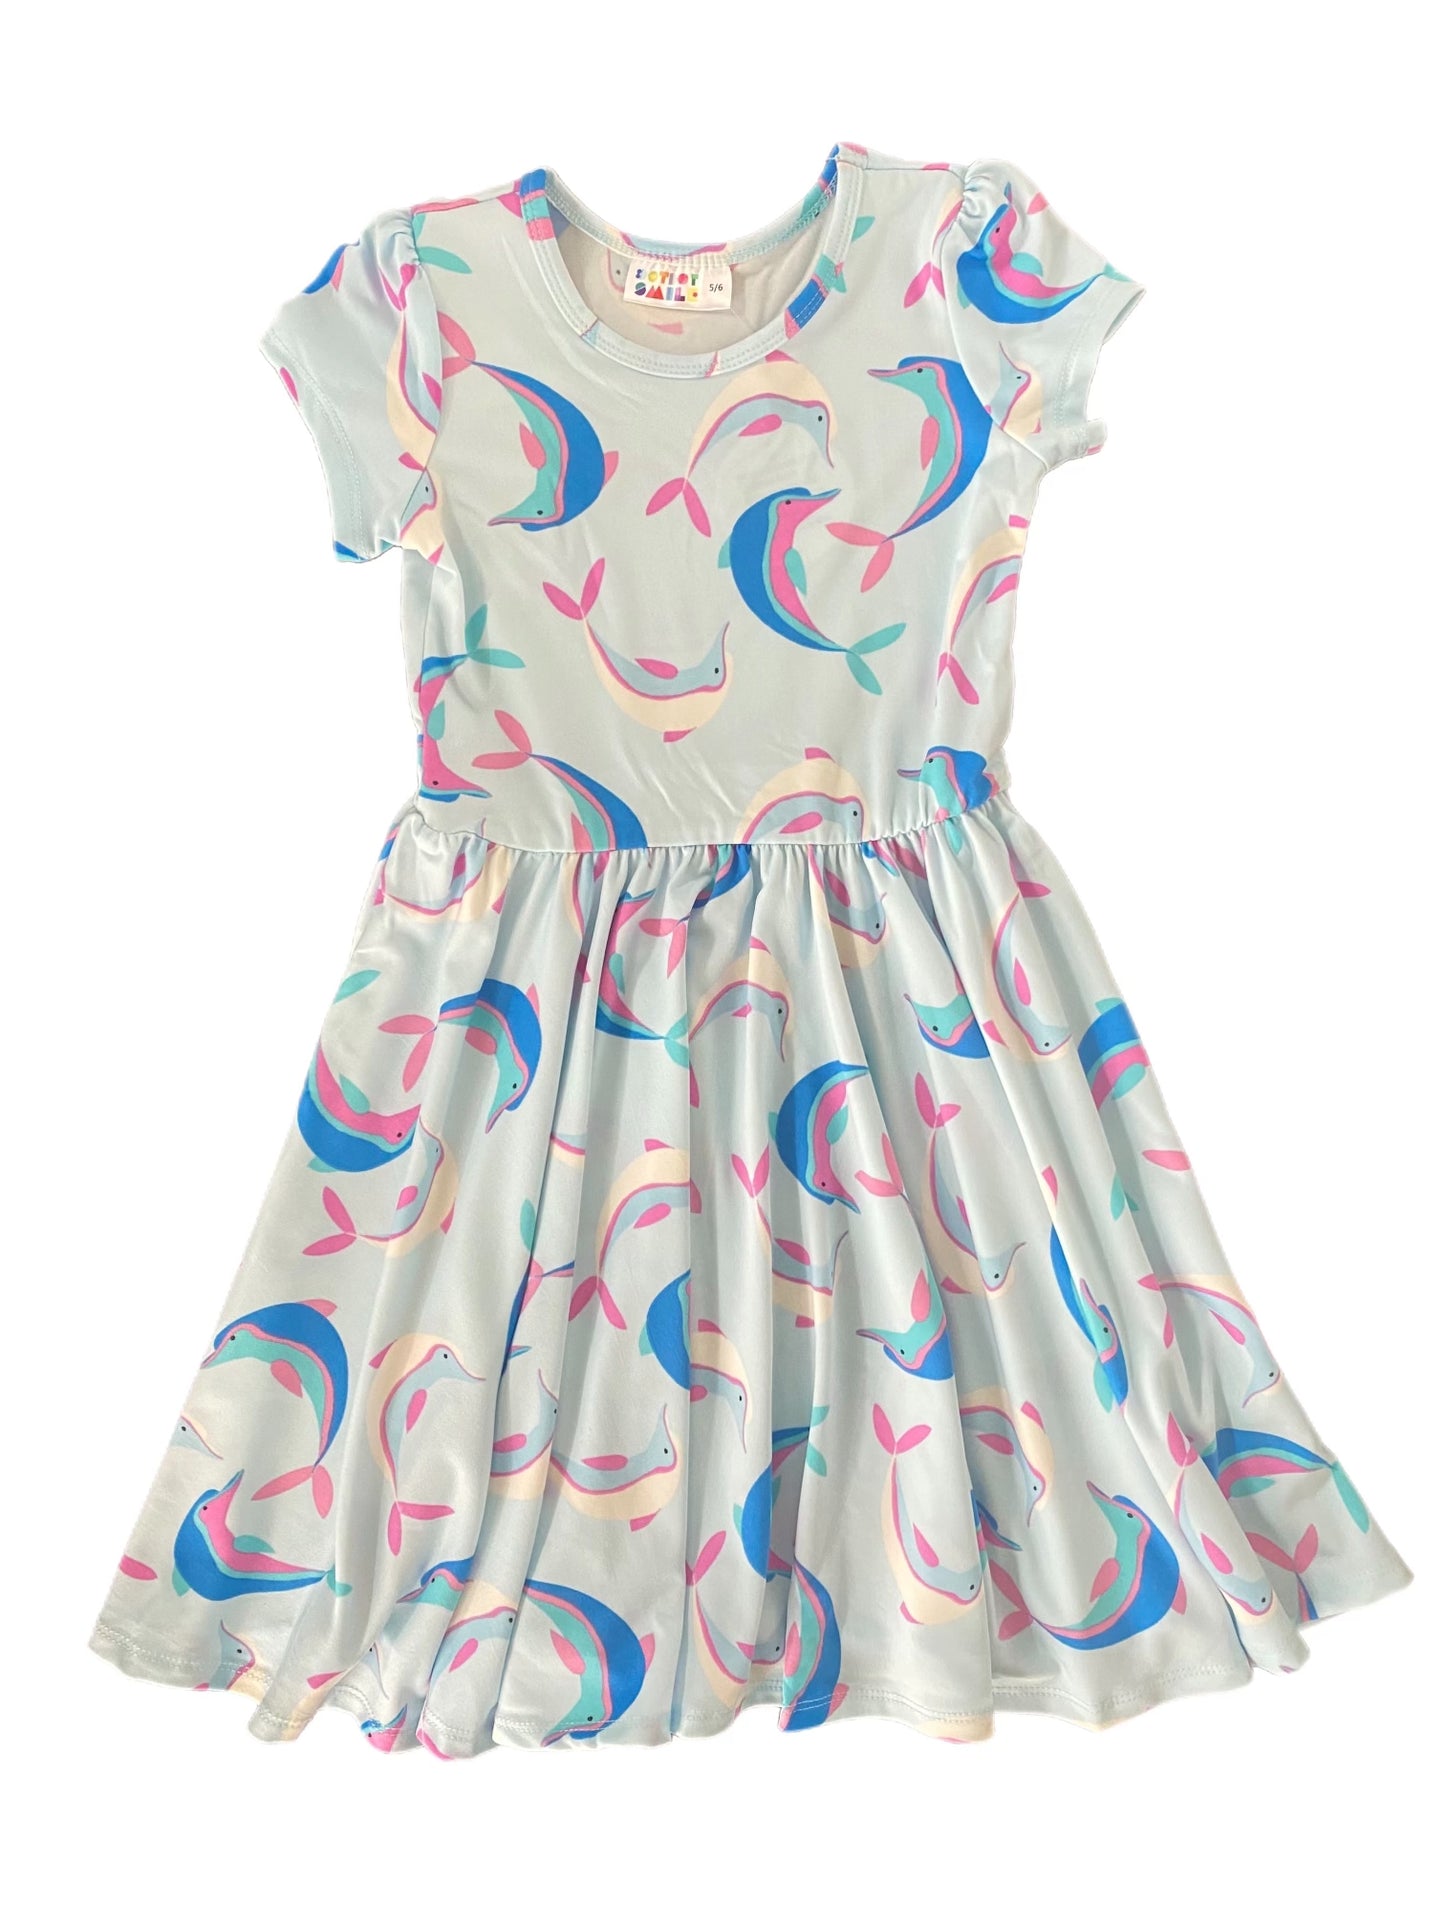 Colorful Dolphins Cap Dress